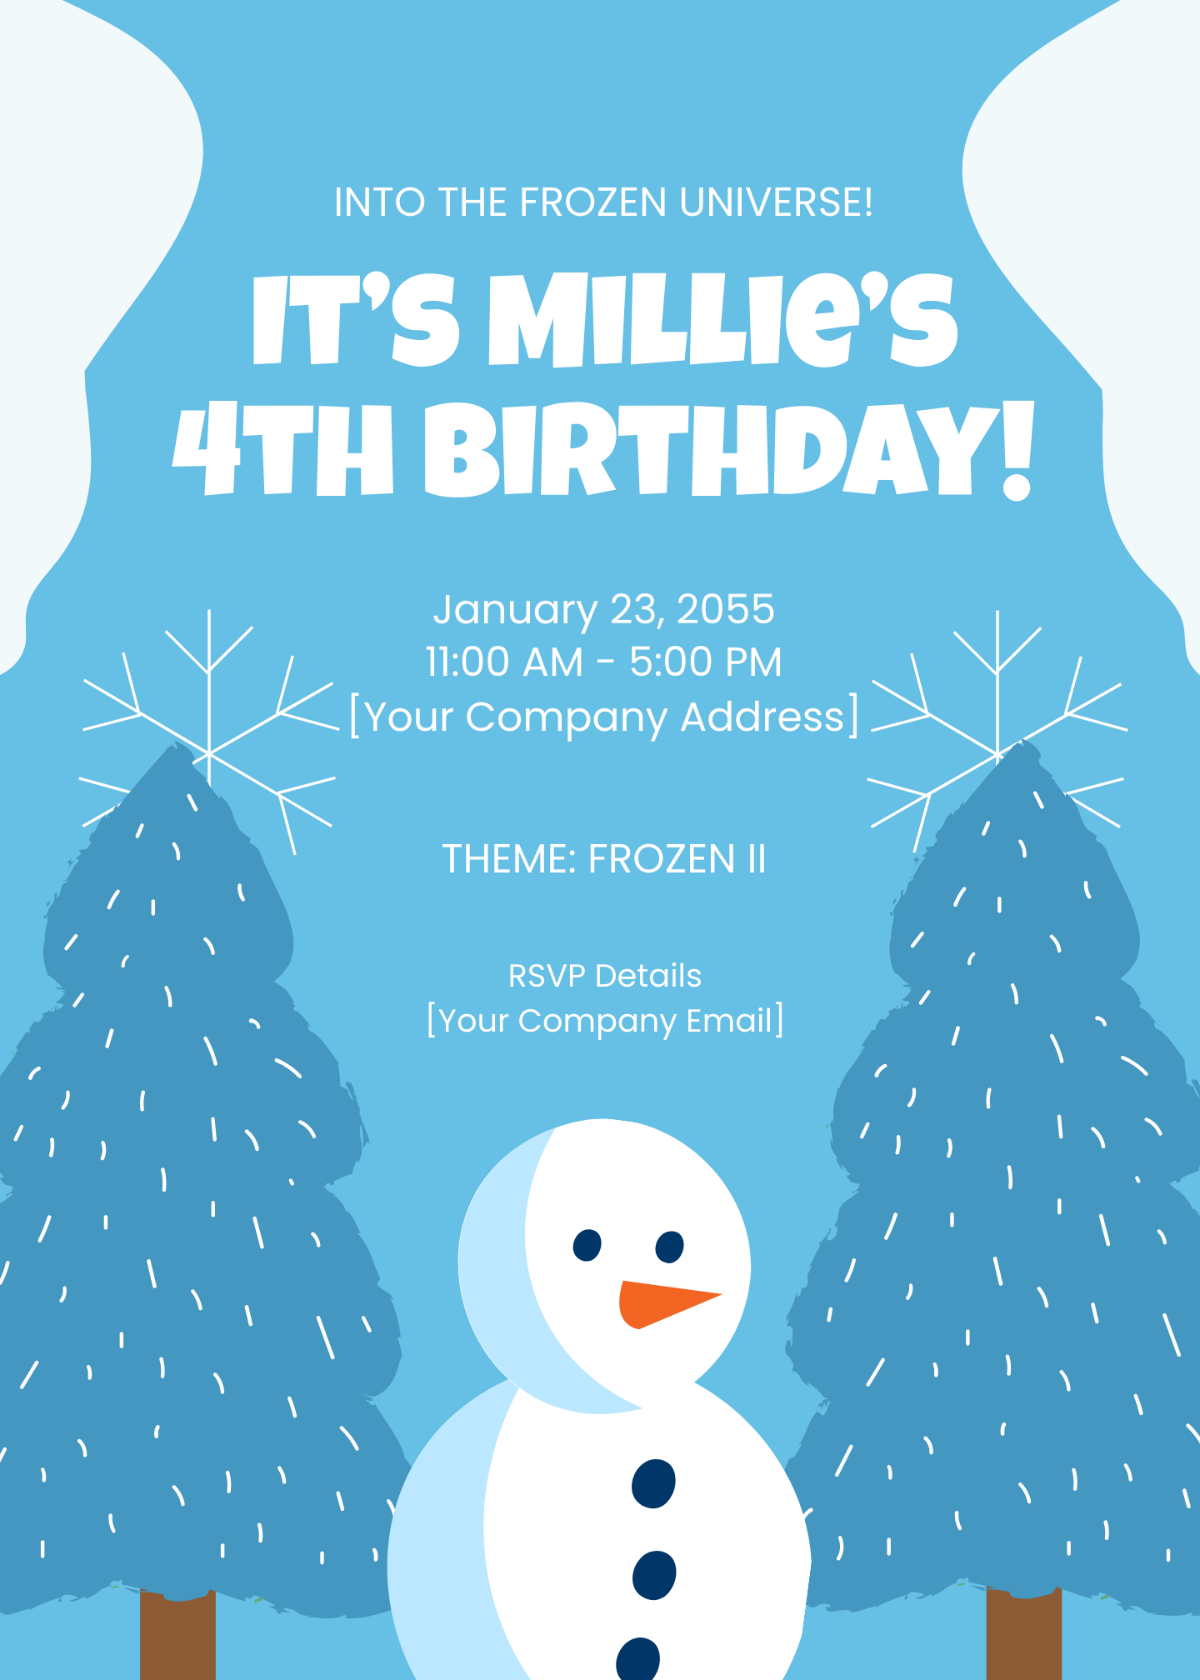 Cute and Classy Snowman Christmas Party Invitations – Artistically Invited